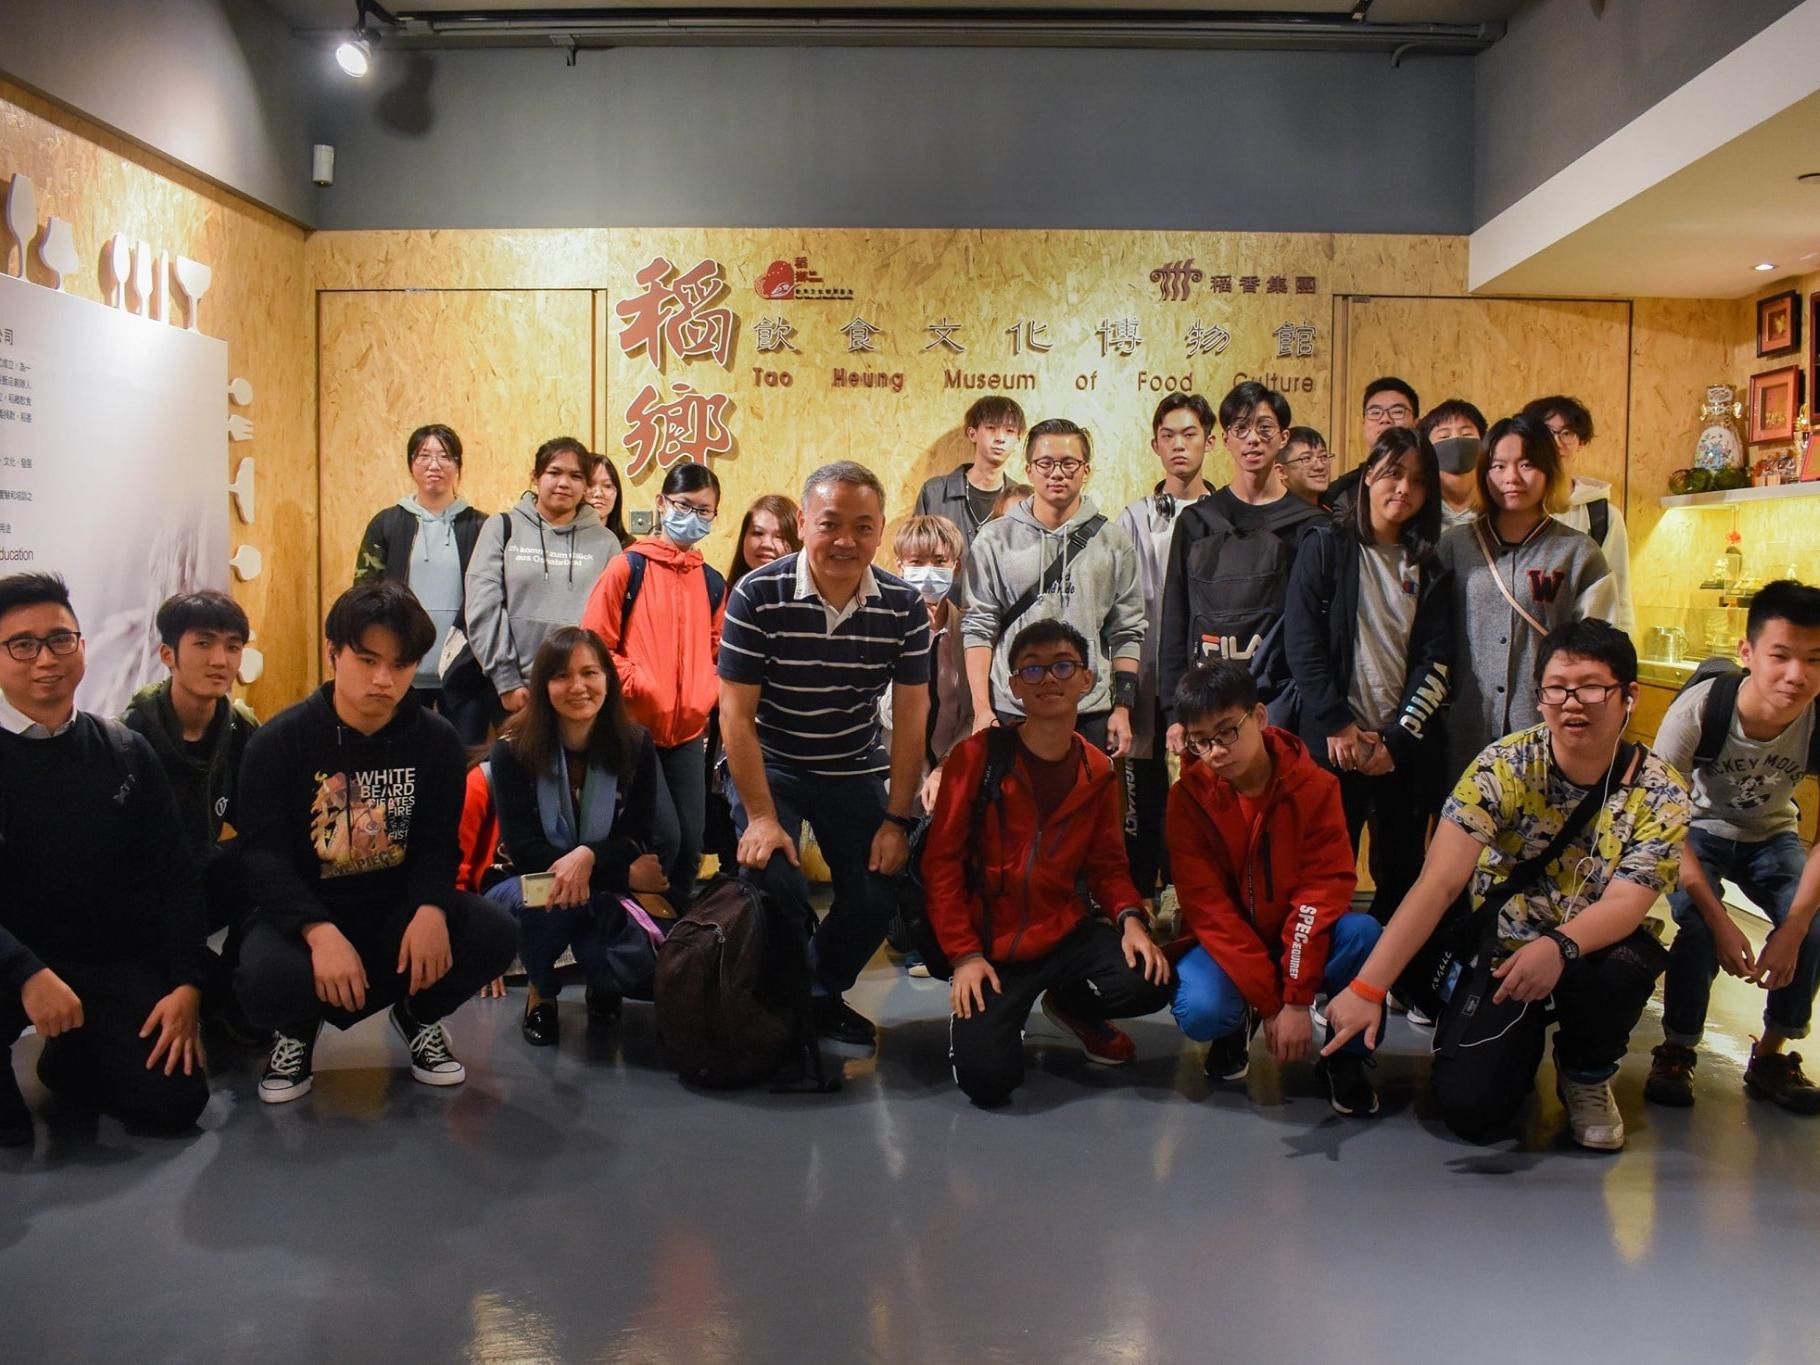 Business students took a group photo at Tao Heung Museum of Food Culture.